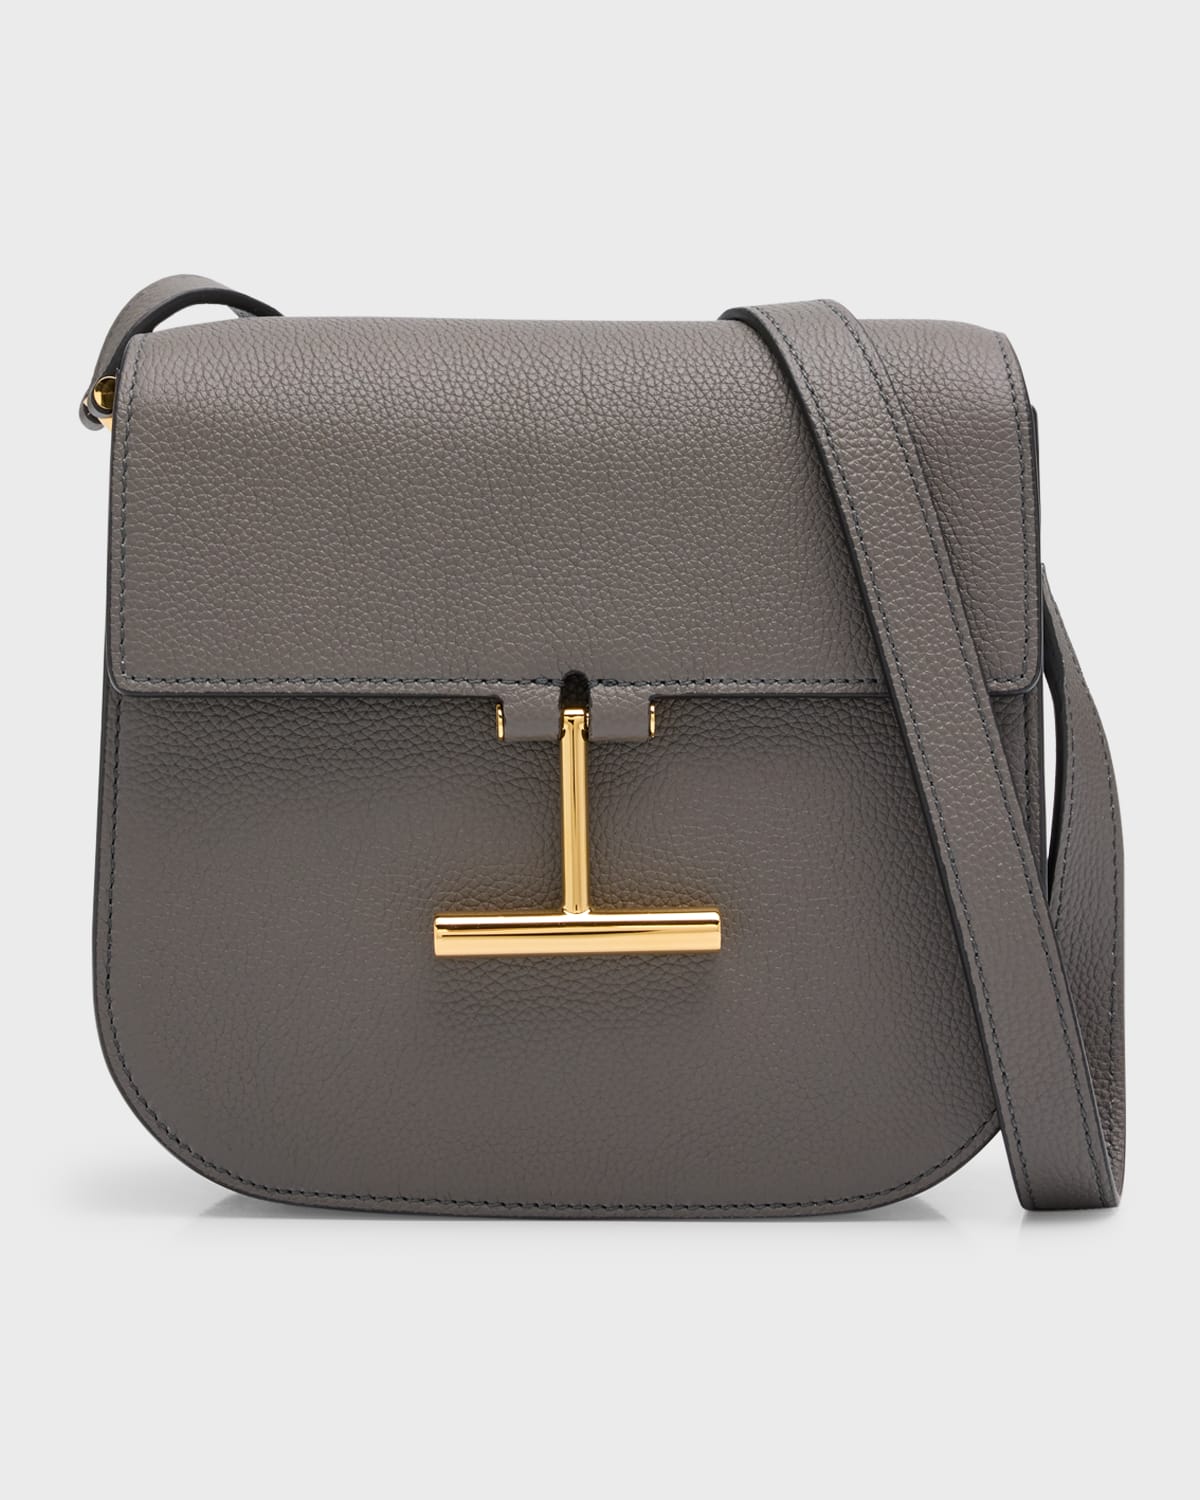 TOM FORD TARA MINI CROSSBOSY IN GRAINED LEATHER WITH LEATHER STRAP